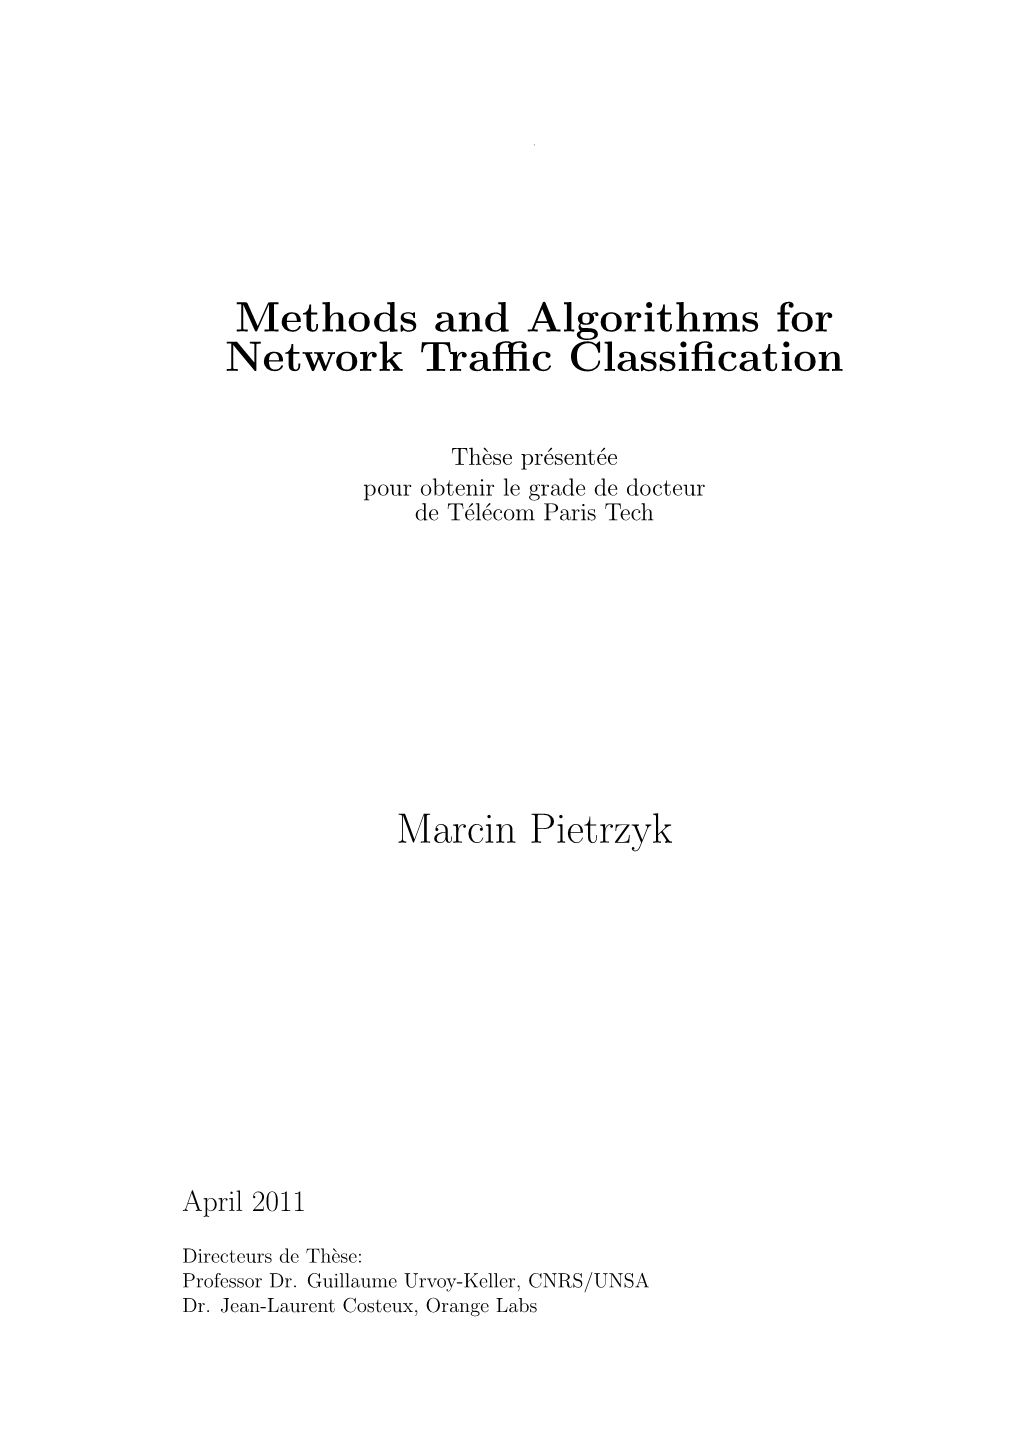 Methods and Algorithms for Network Traffic Classification Marcin Pietrzyk